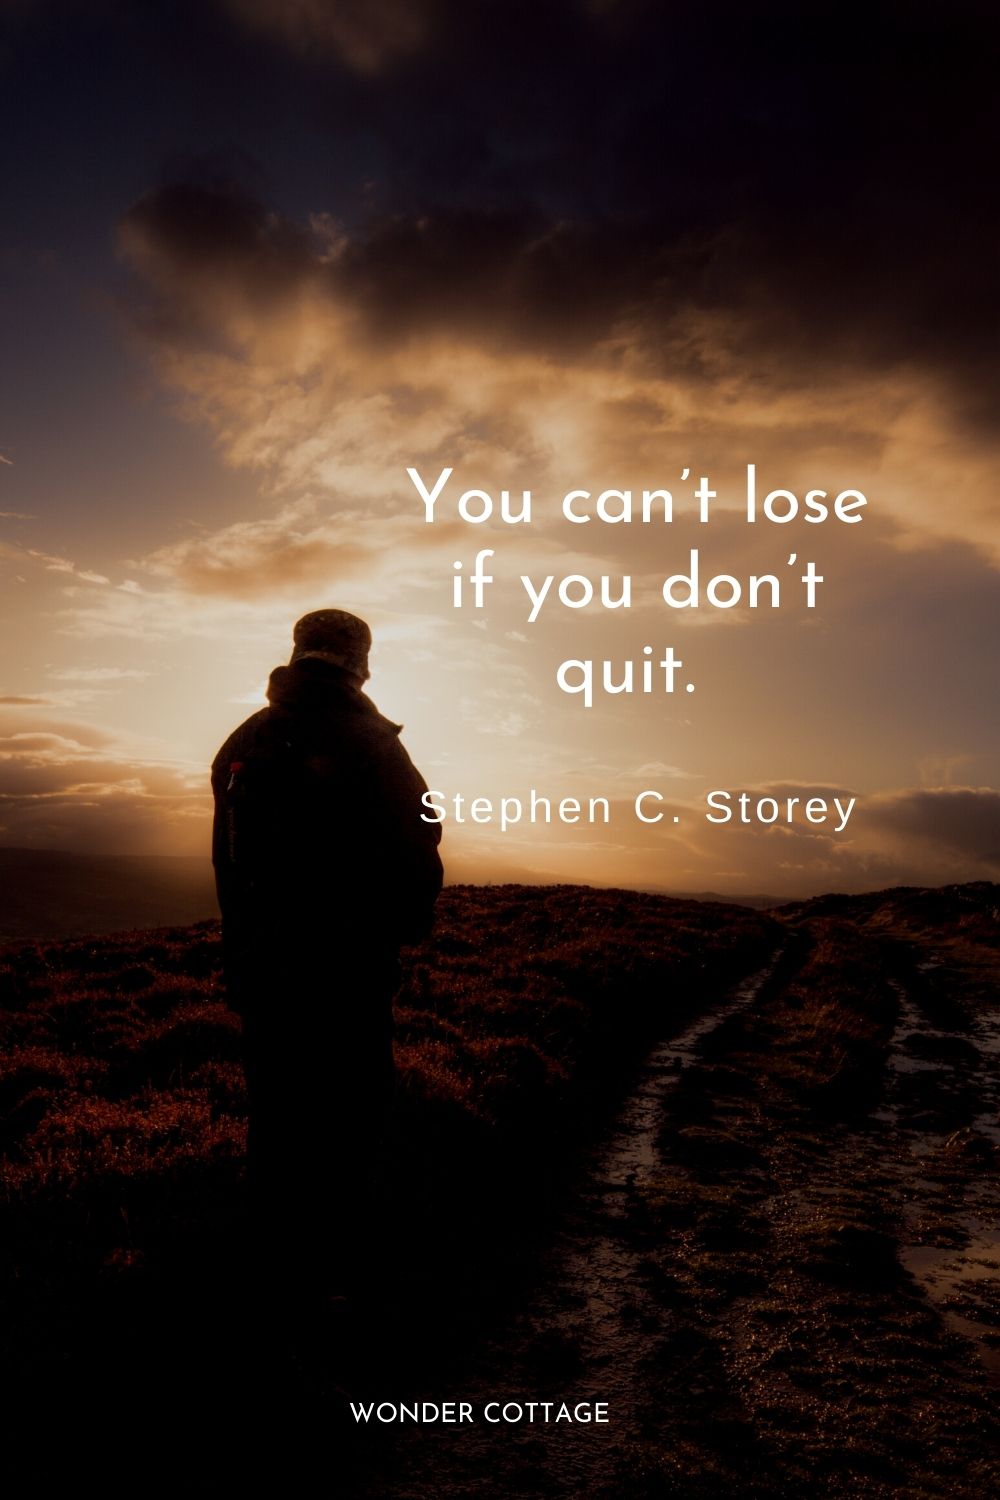 You can’t lose if you don’t quit.  Stephen C. Storey